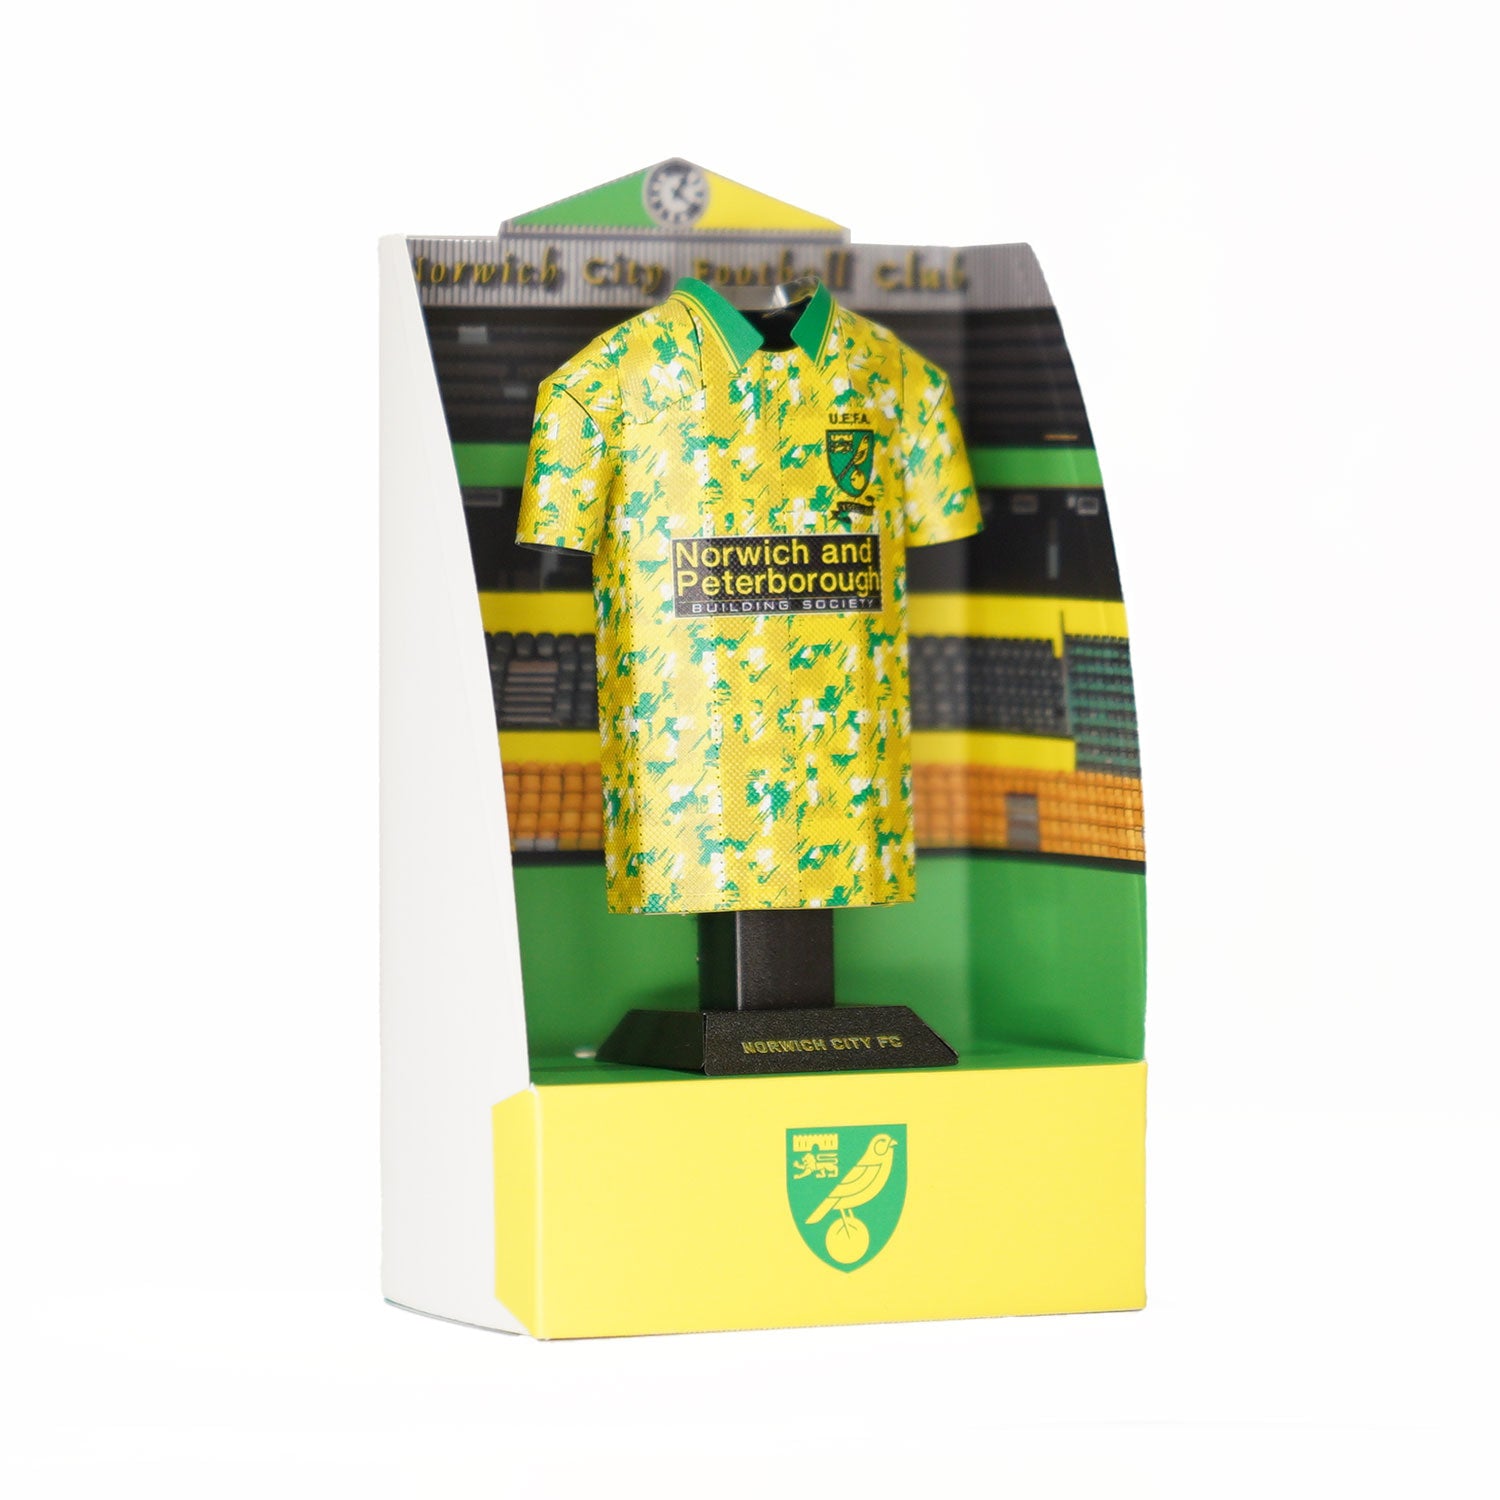 Norwich City 1993 UEFA Cup shirt on display